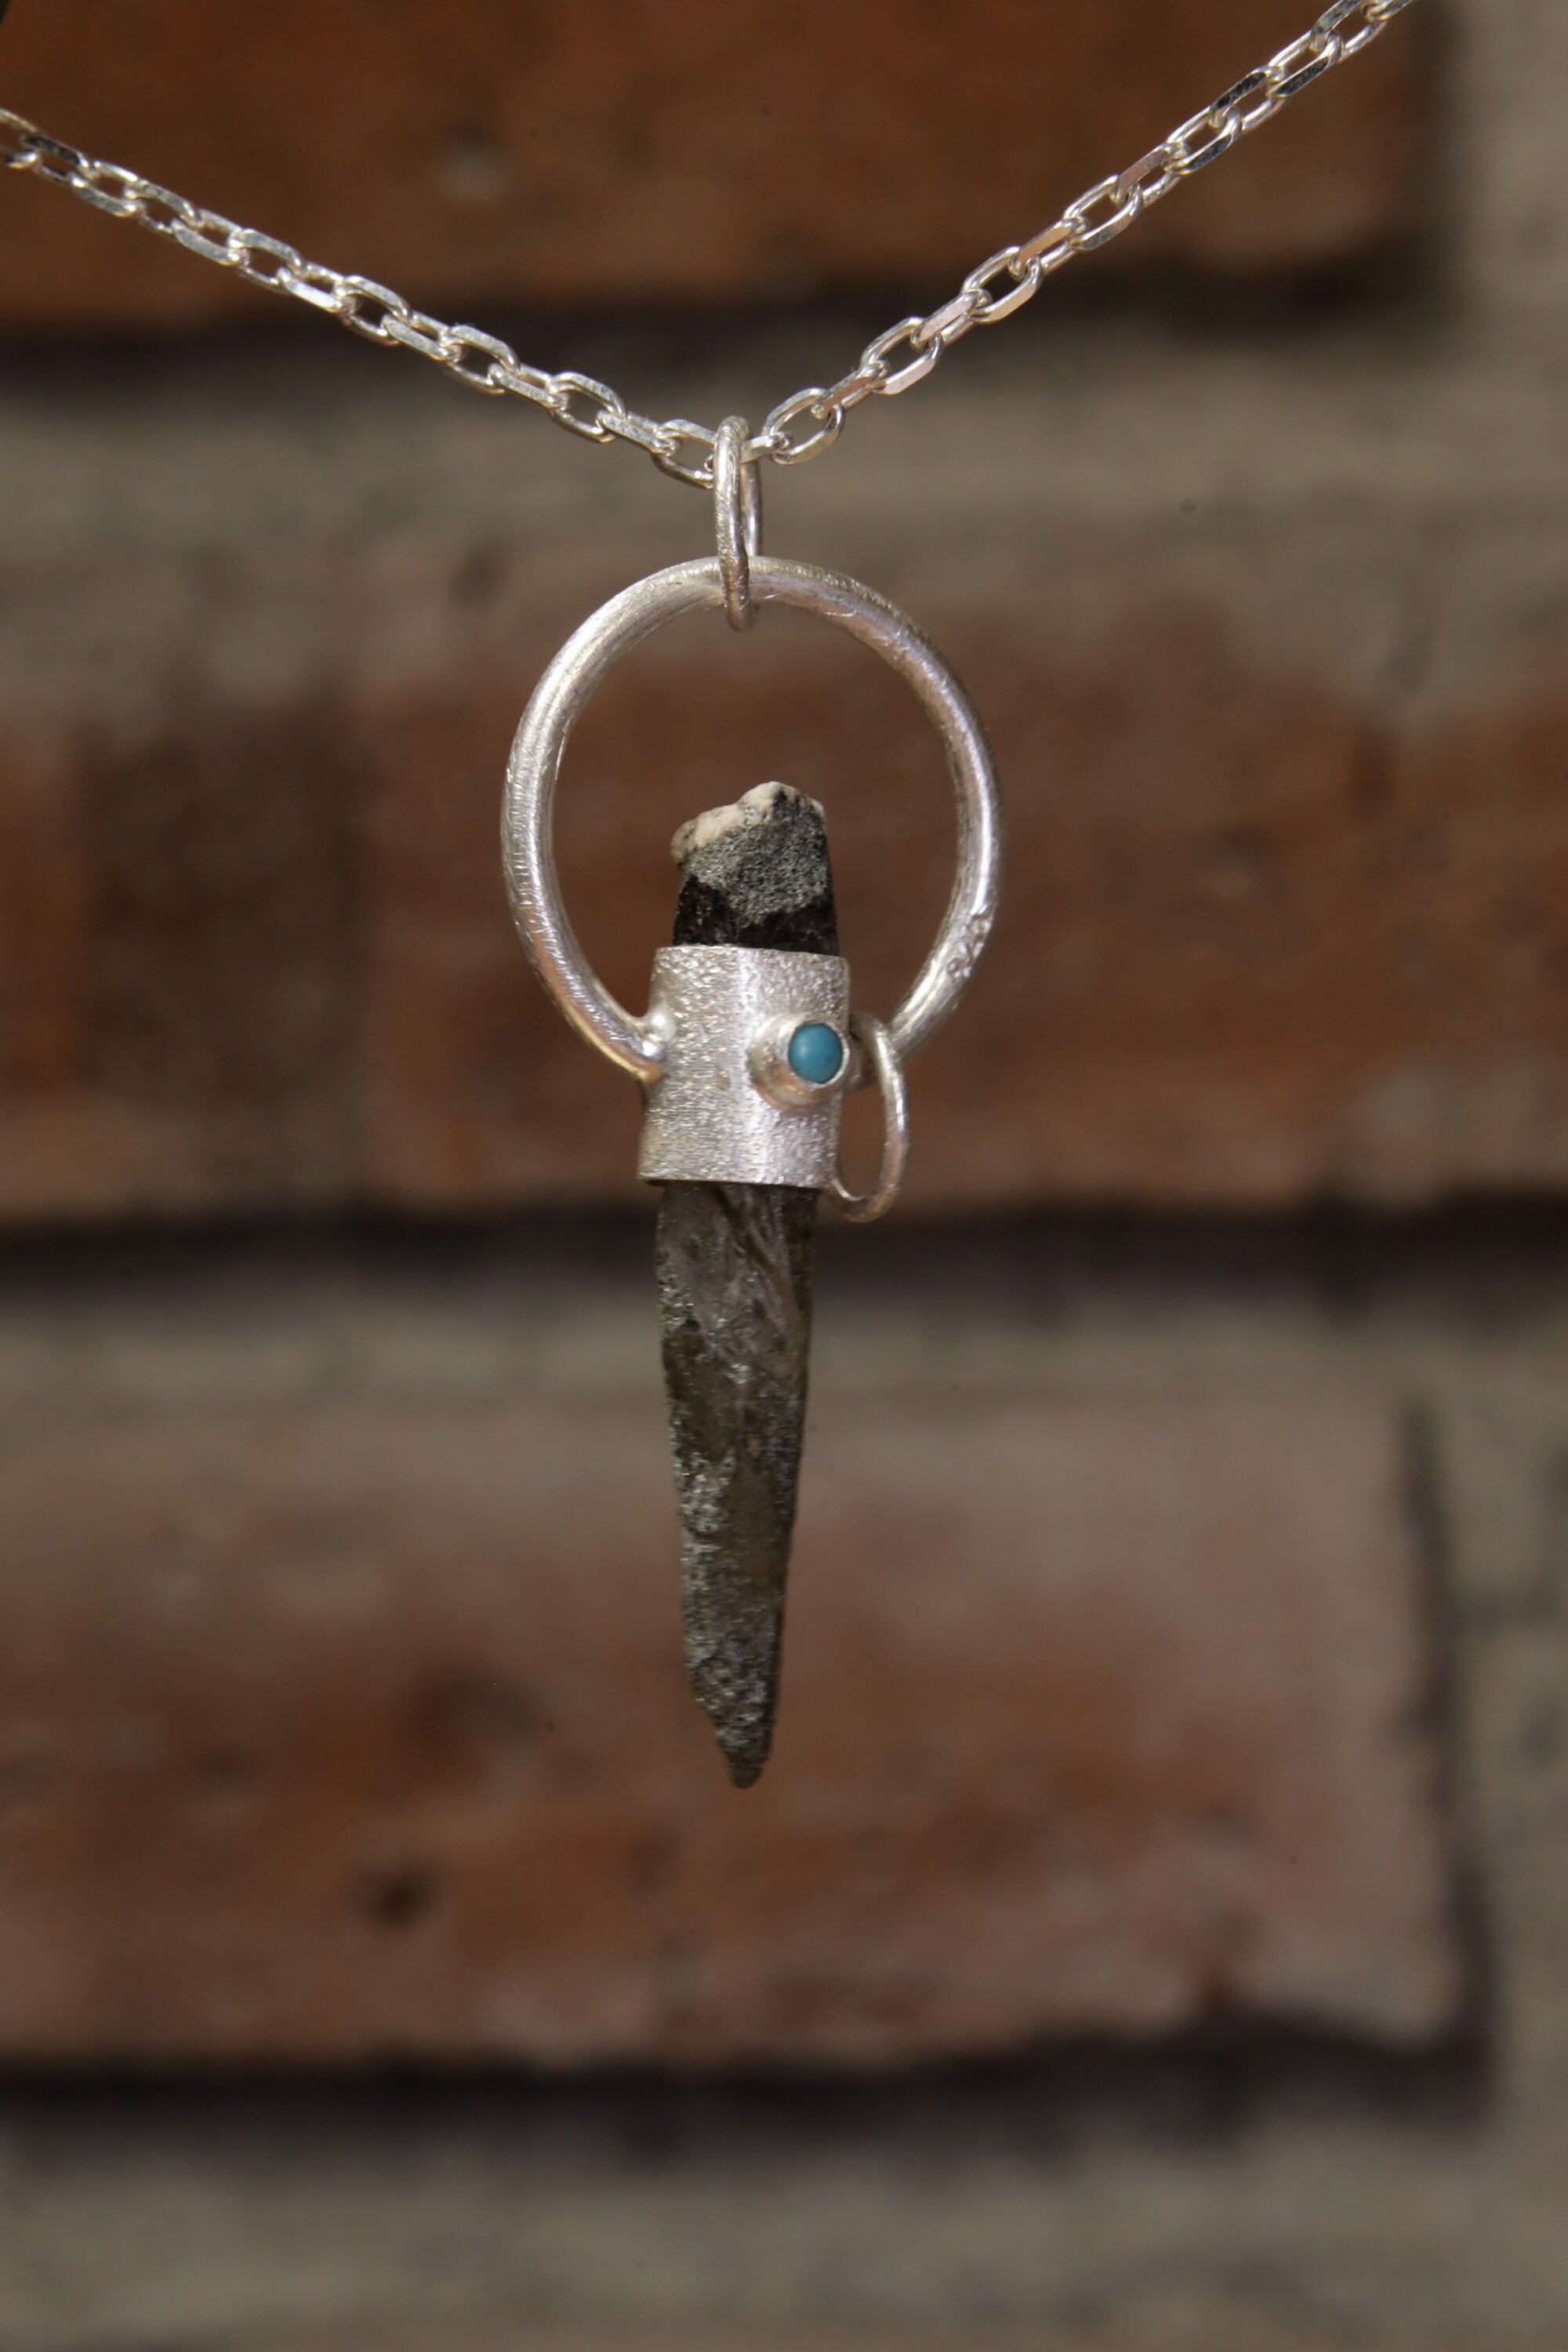 Emerald Whisper: Sterling Silver Sand-Textured Crystal Pendant with Himalayan Chlorite Quartz and Emerald